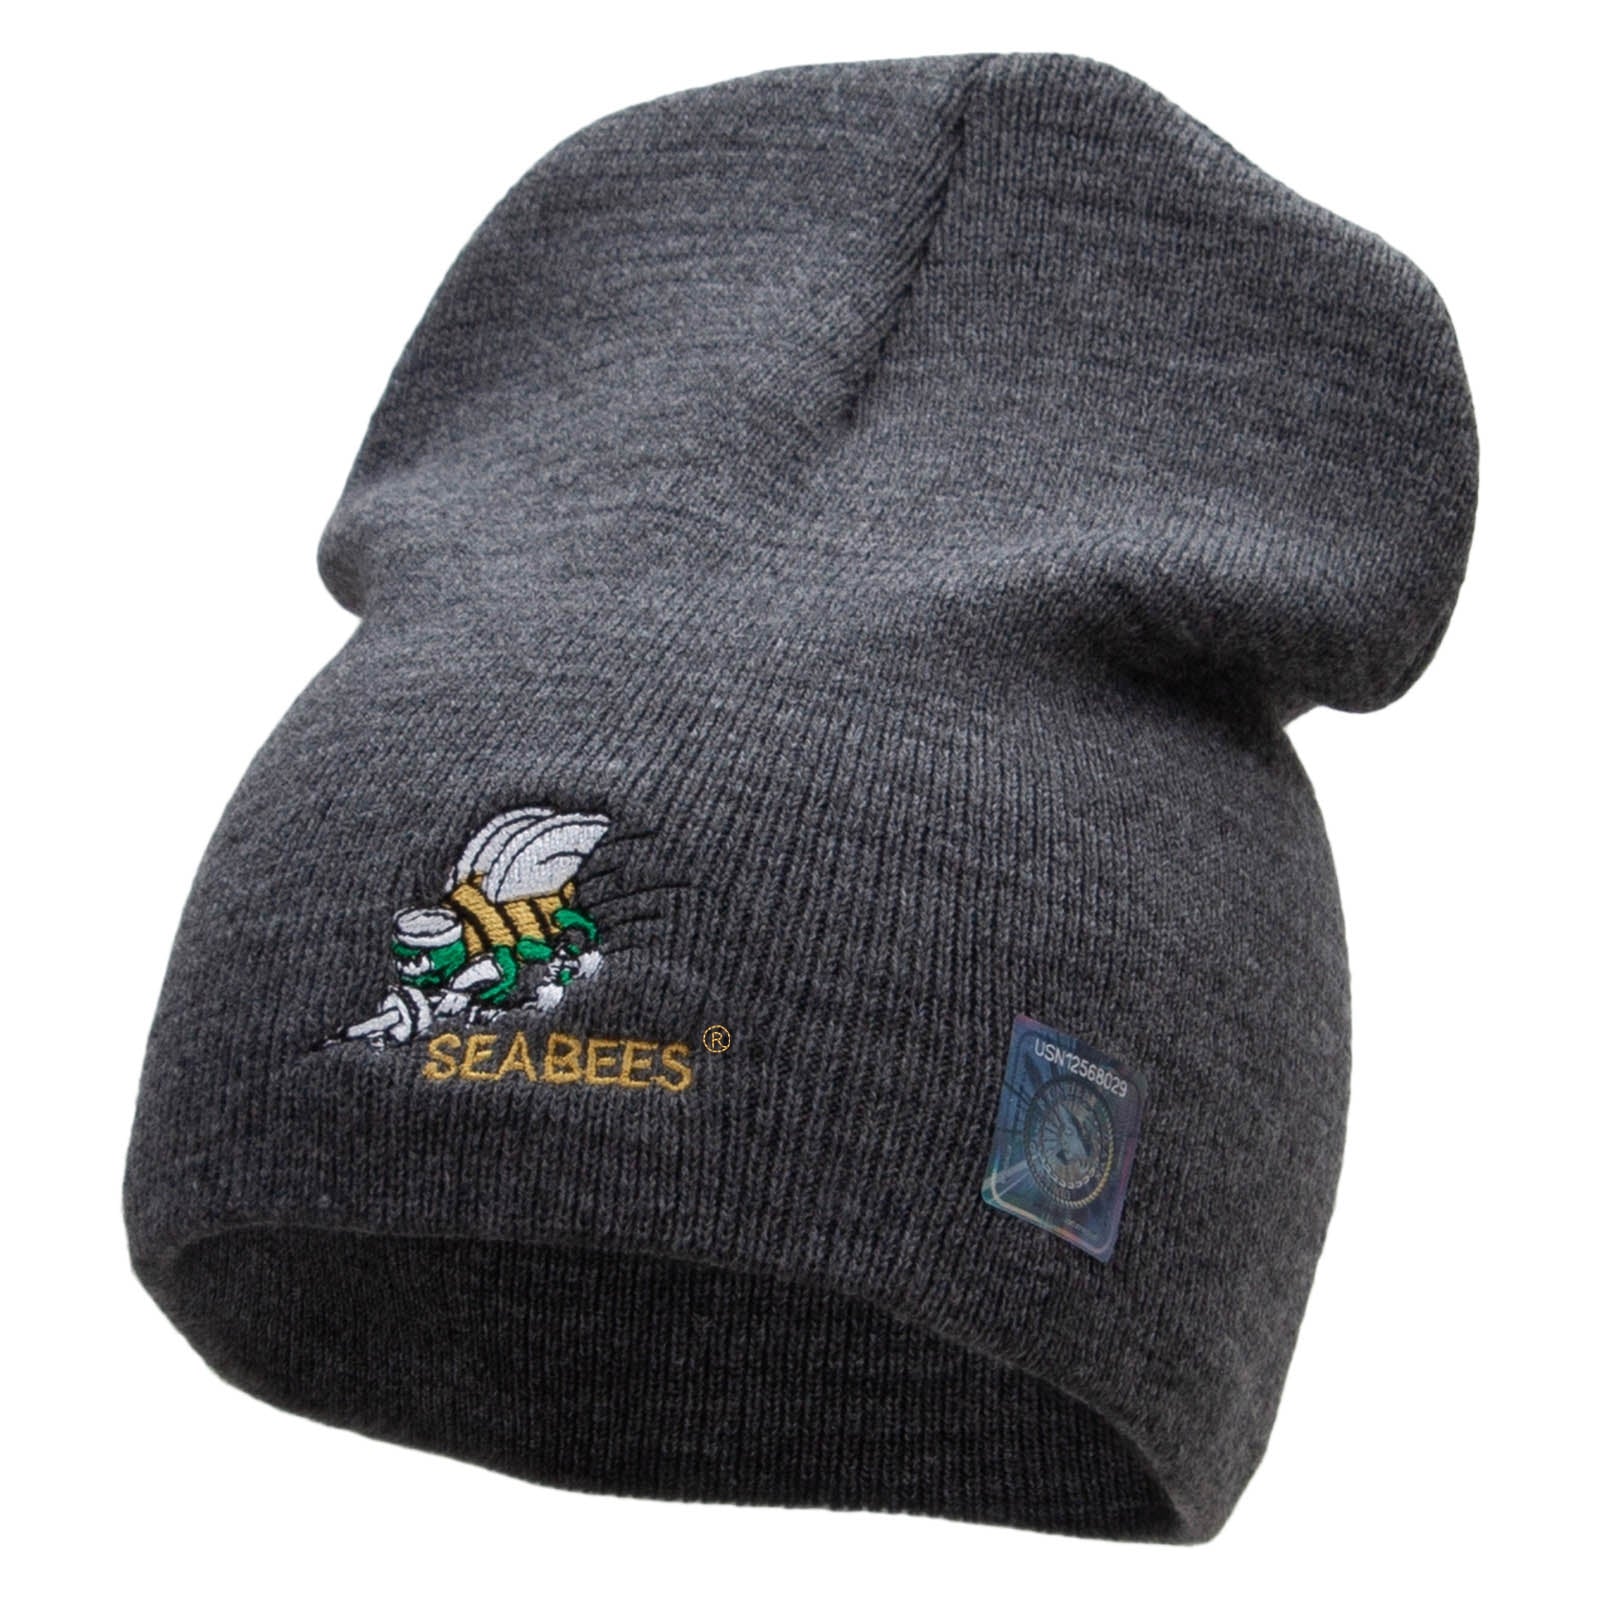 Licensed Navy Seabees Symbol Embroidered Short Beanie Made in USA - Dk Grey OSFM